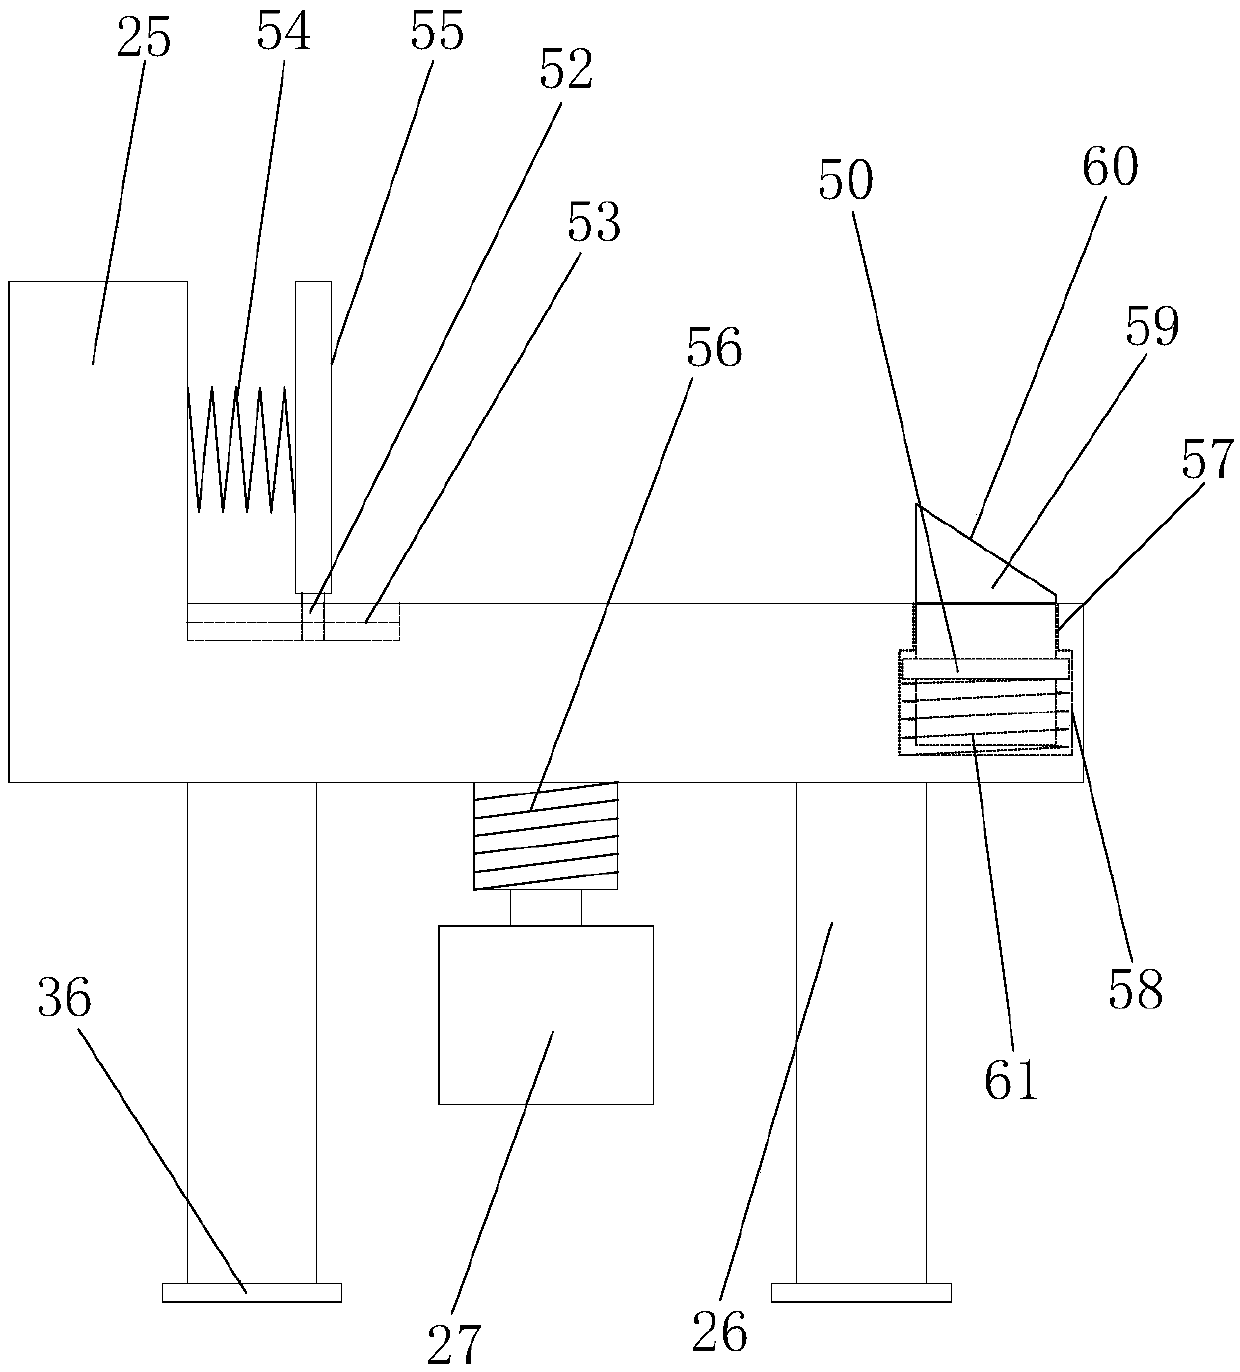 Transformer fault detection device based on infrared imaging technology